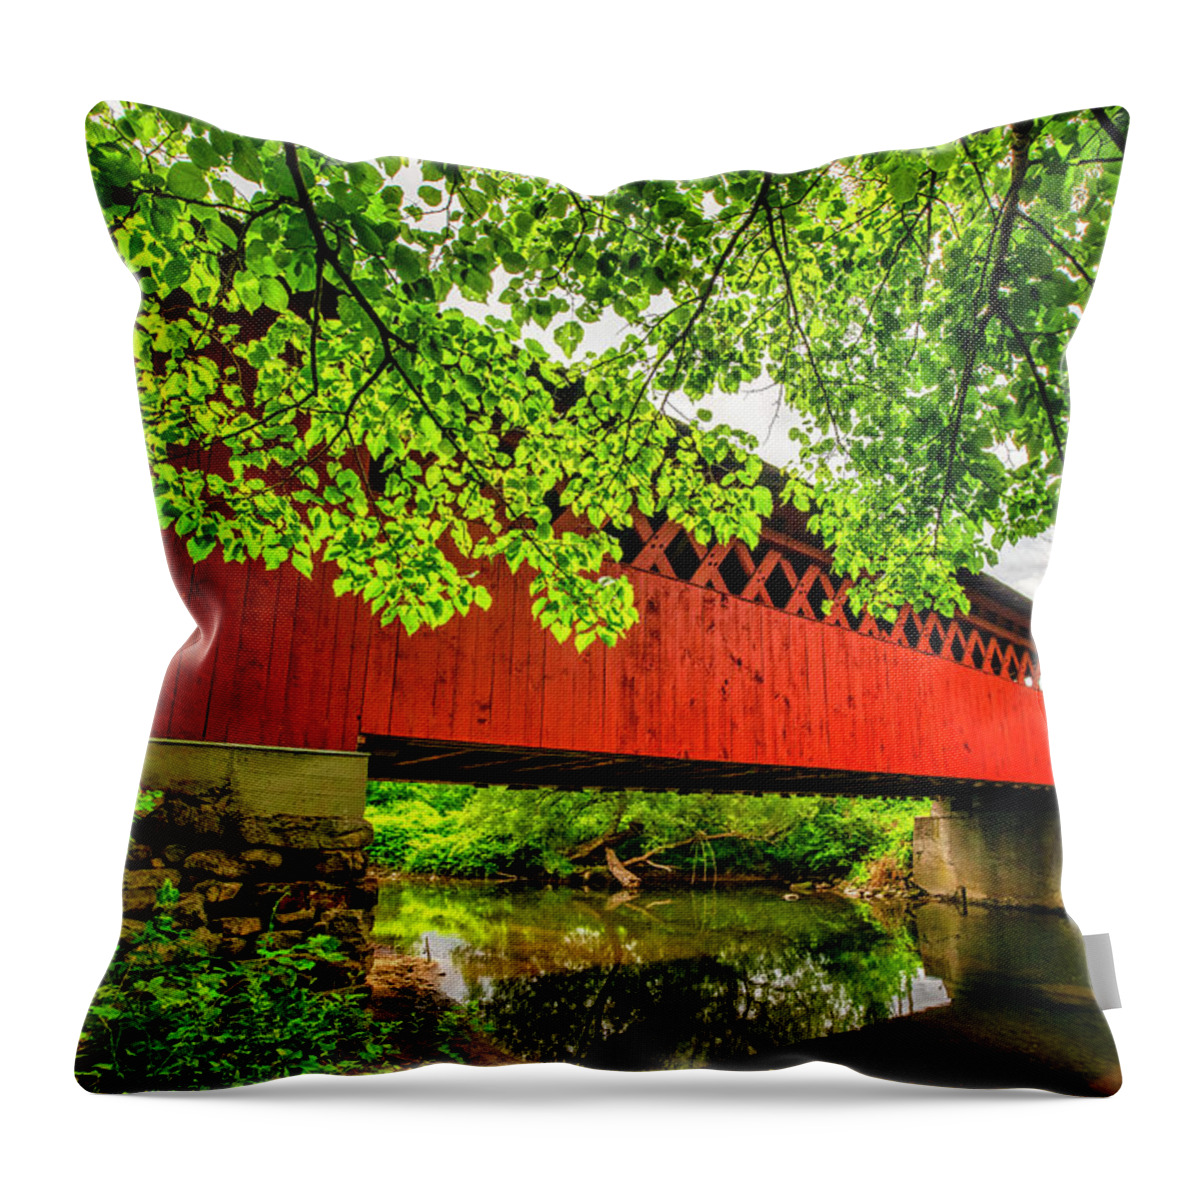 America Throw Pillow featuring the photograph Silk Covered Bridge by Andy Crawford